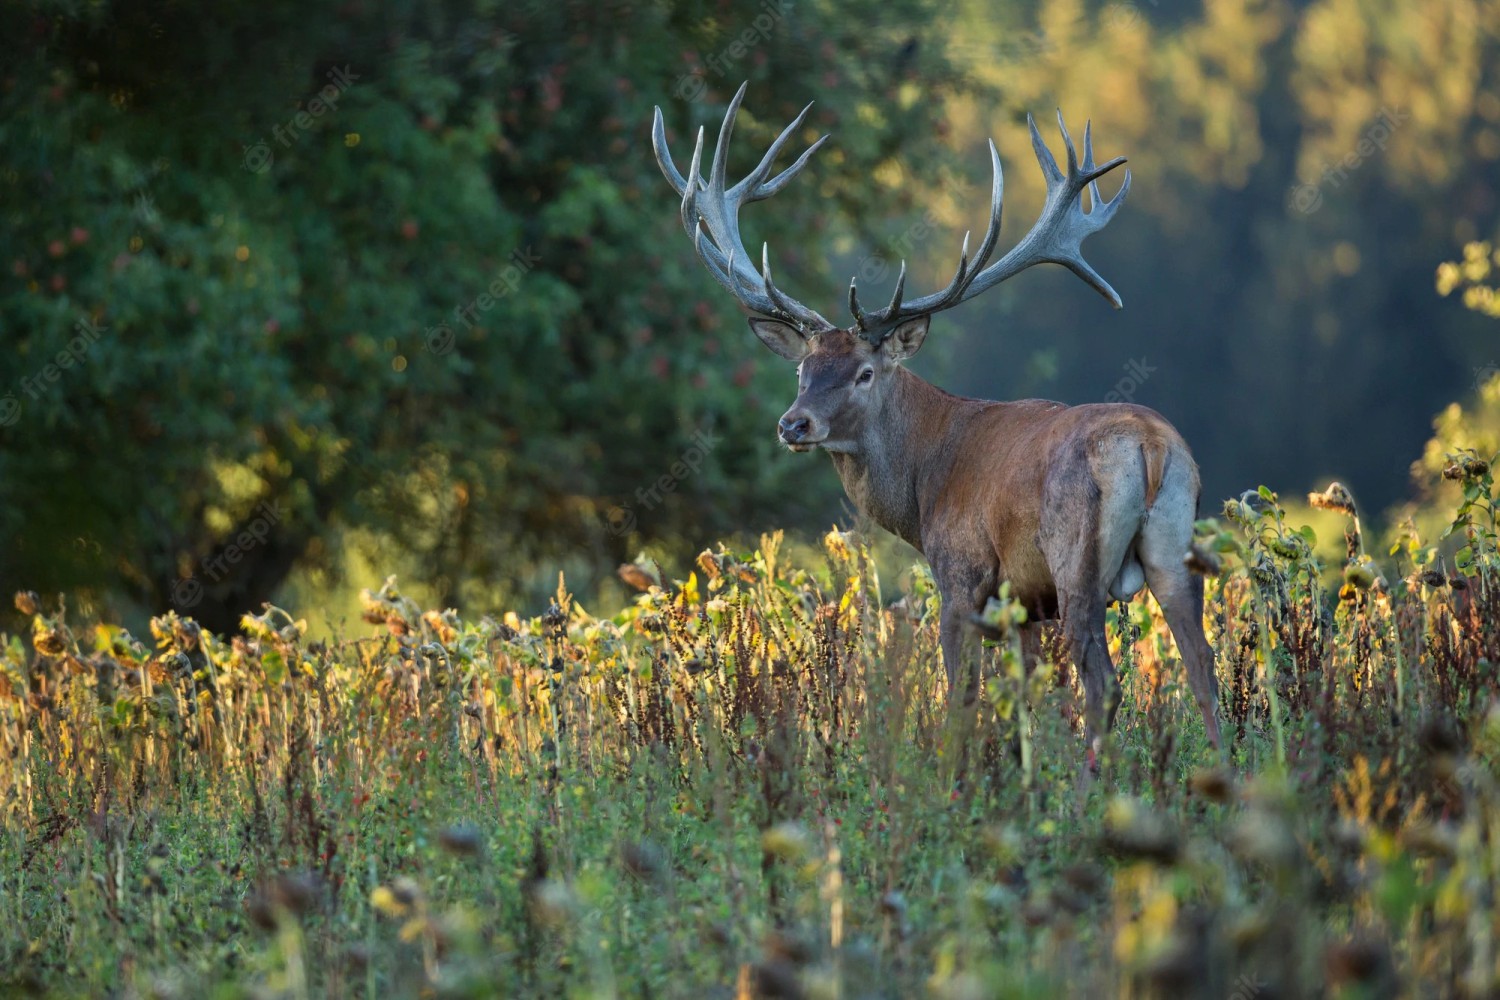 Deer standing in field with sun shining Image address: